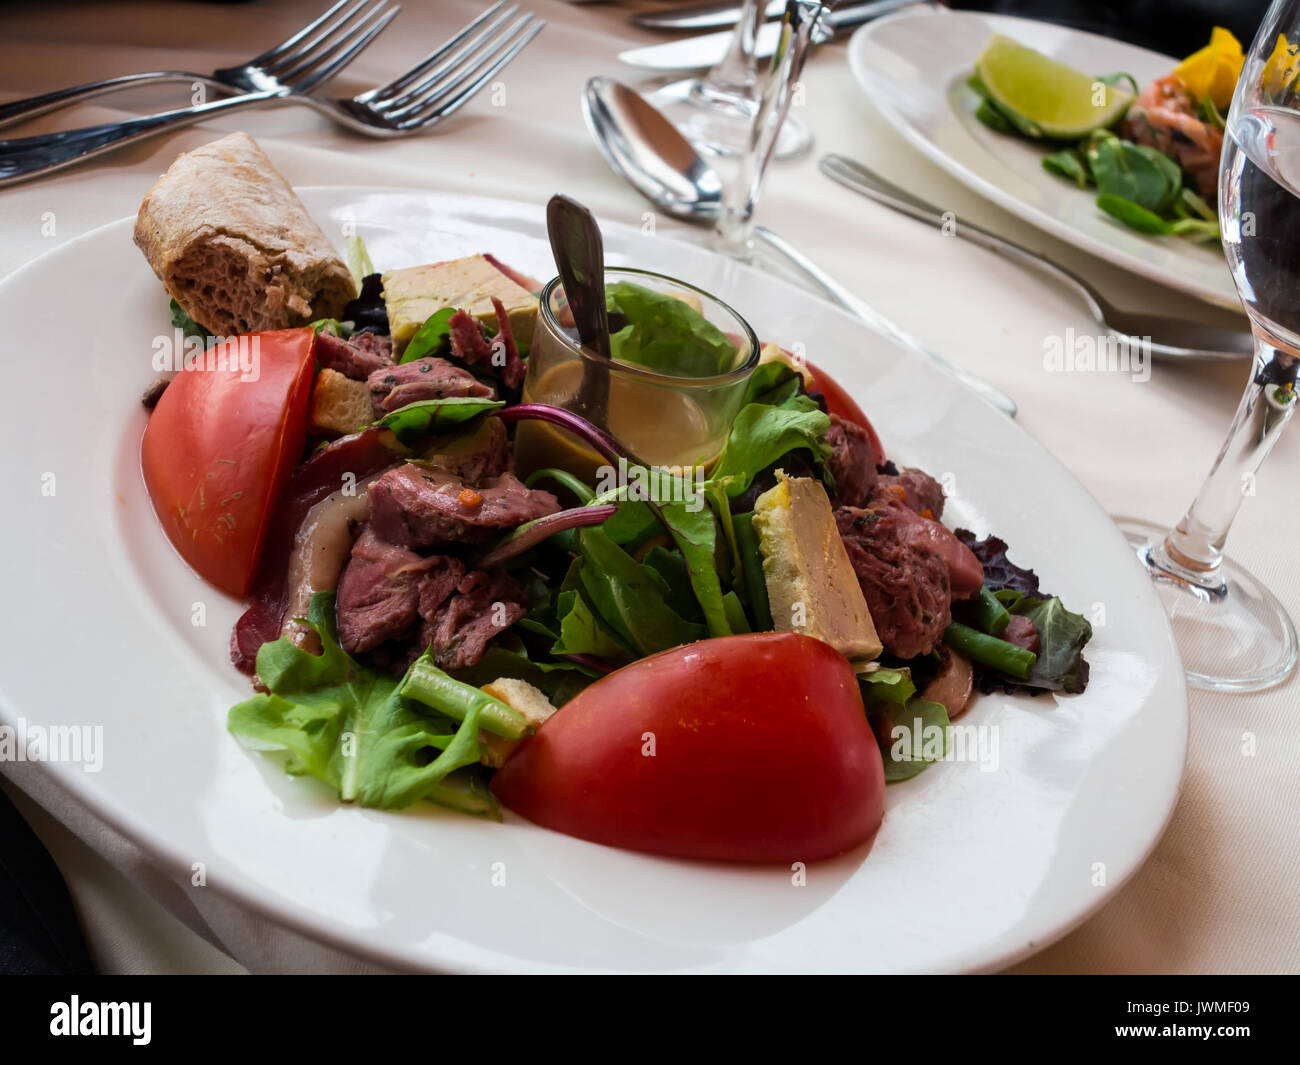 A delicious dinner salad appetizer on a white plate Stock Photo